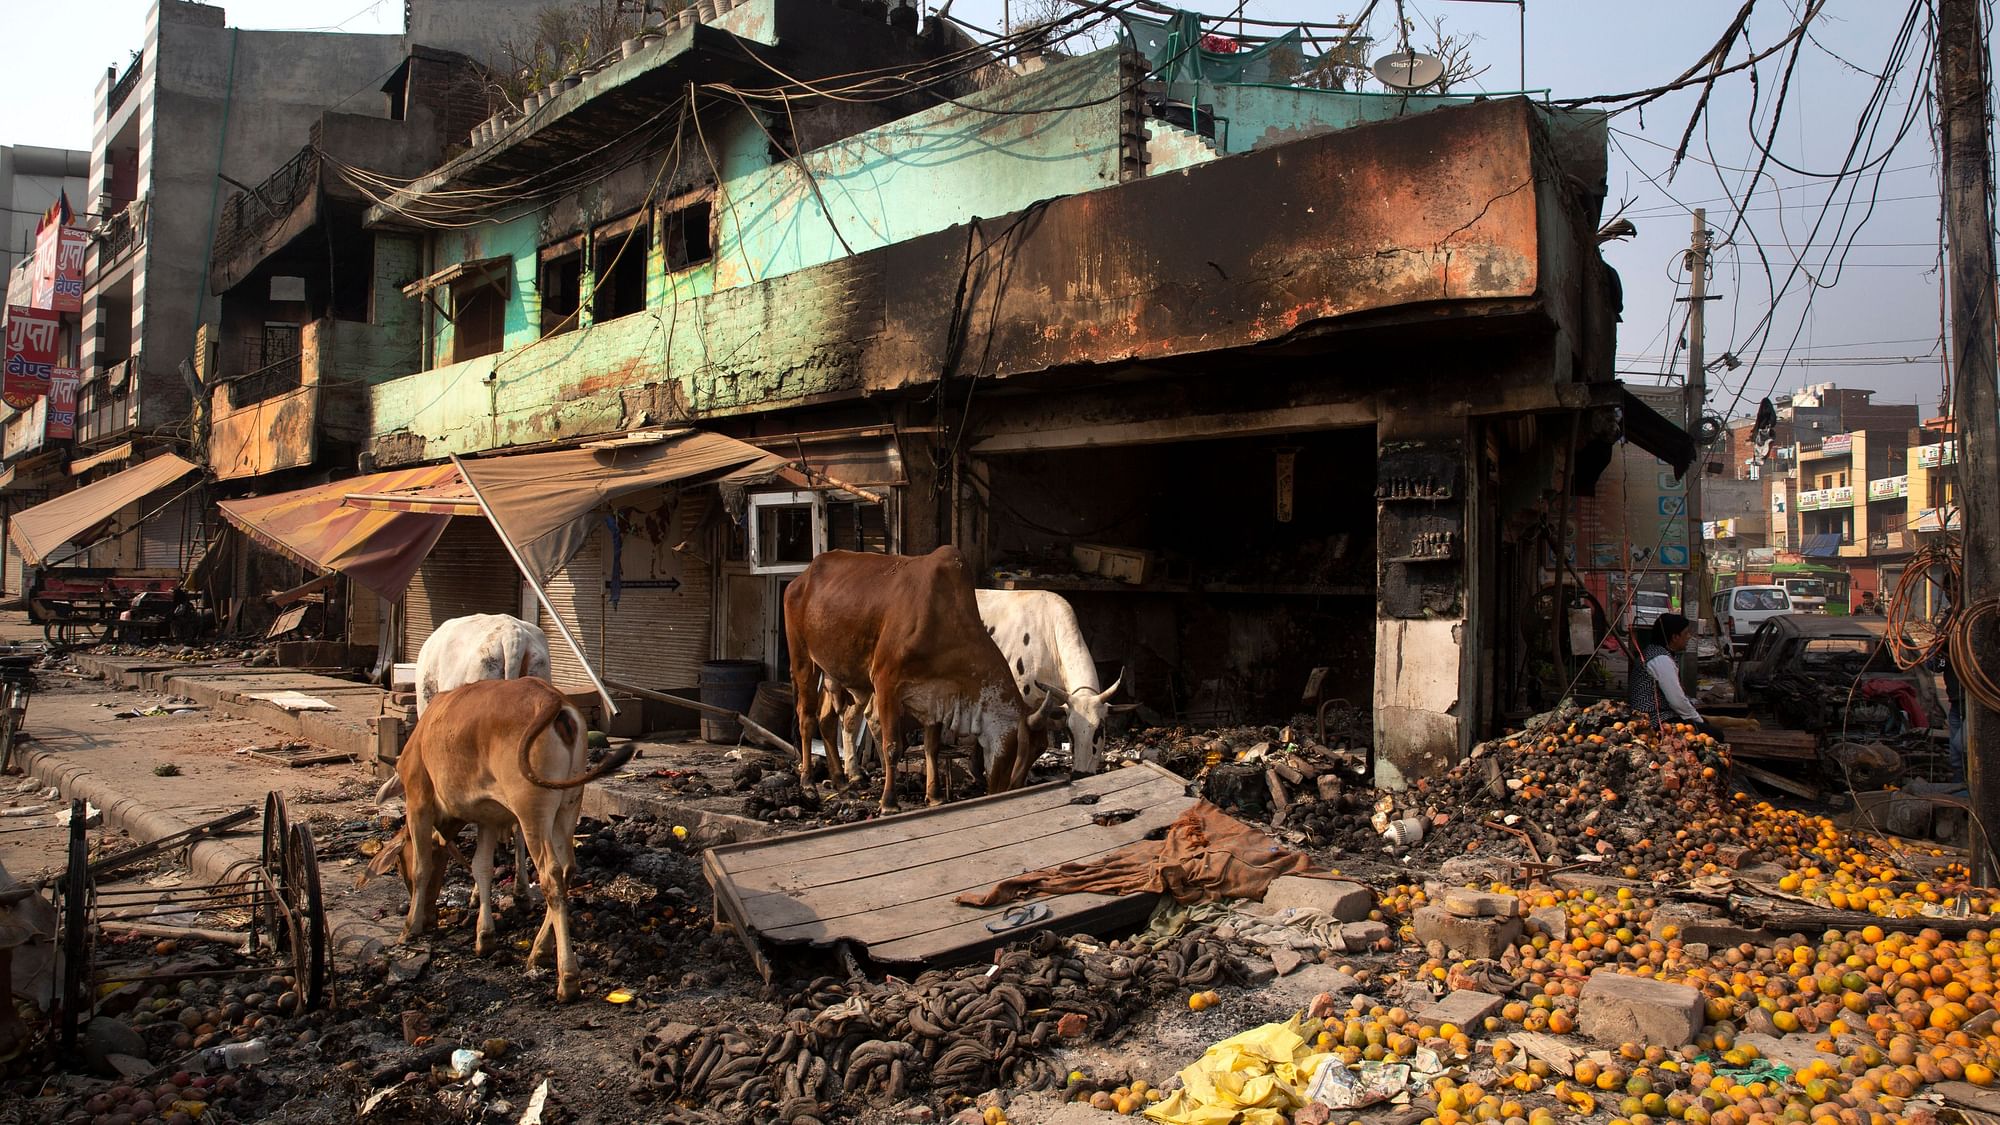 Stray cows feed on oranges lying outside a vandalised and burned shop following the violence in northeast Delhi on Thursday, 27 February.